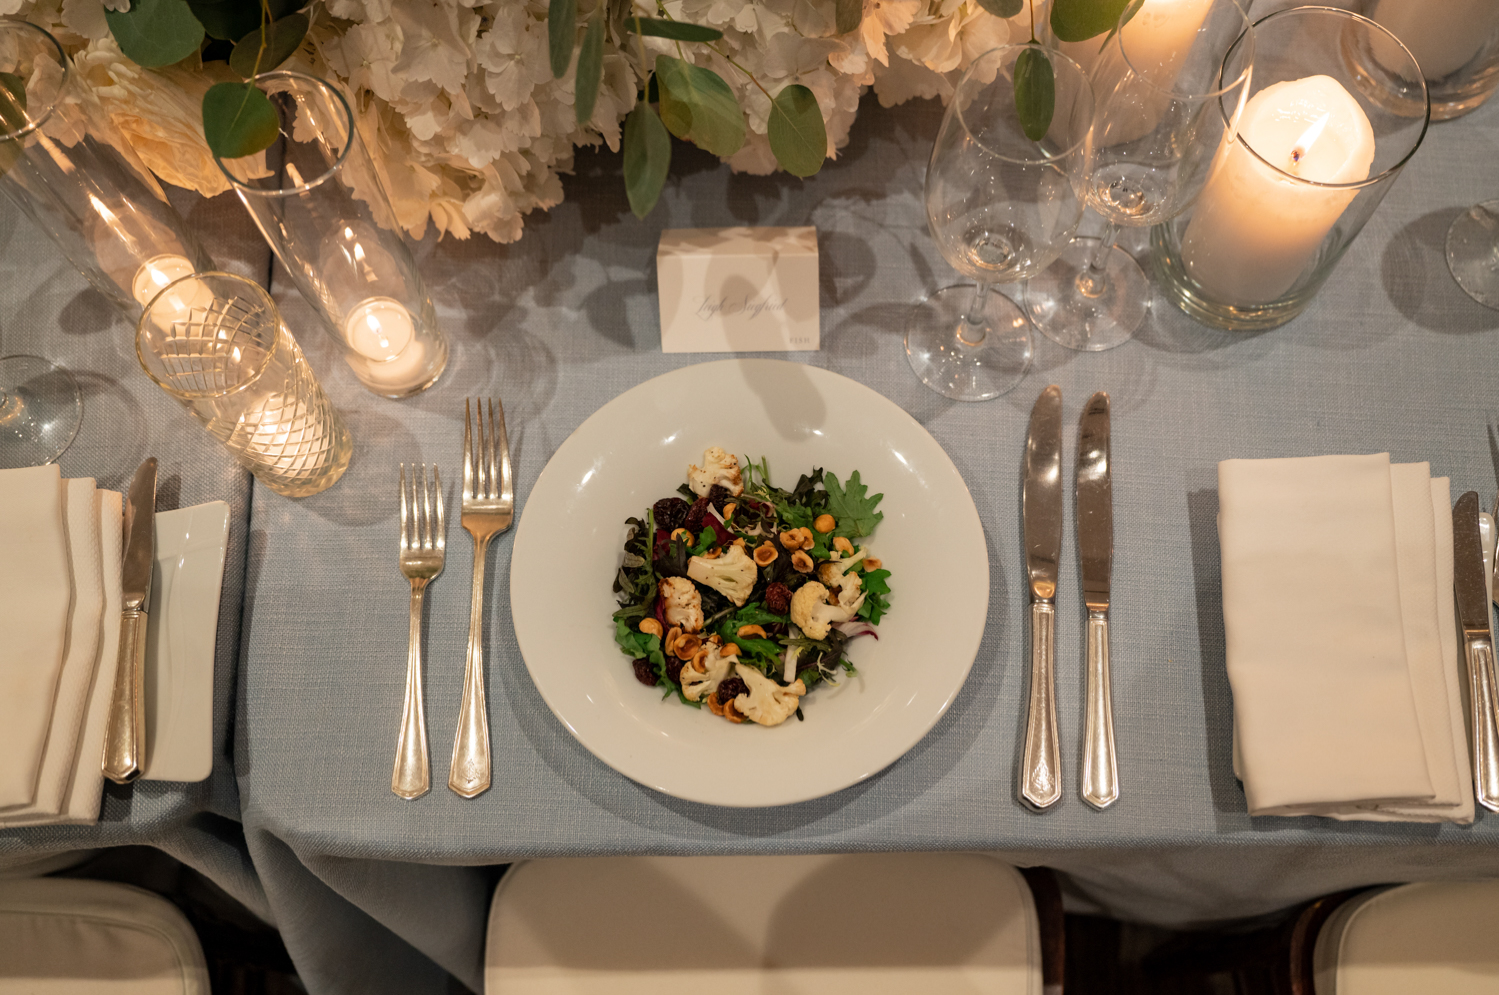 A colorful plated salad at the reception table, surrounded by candles and white florals.